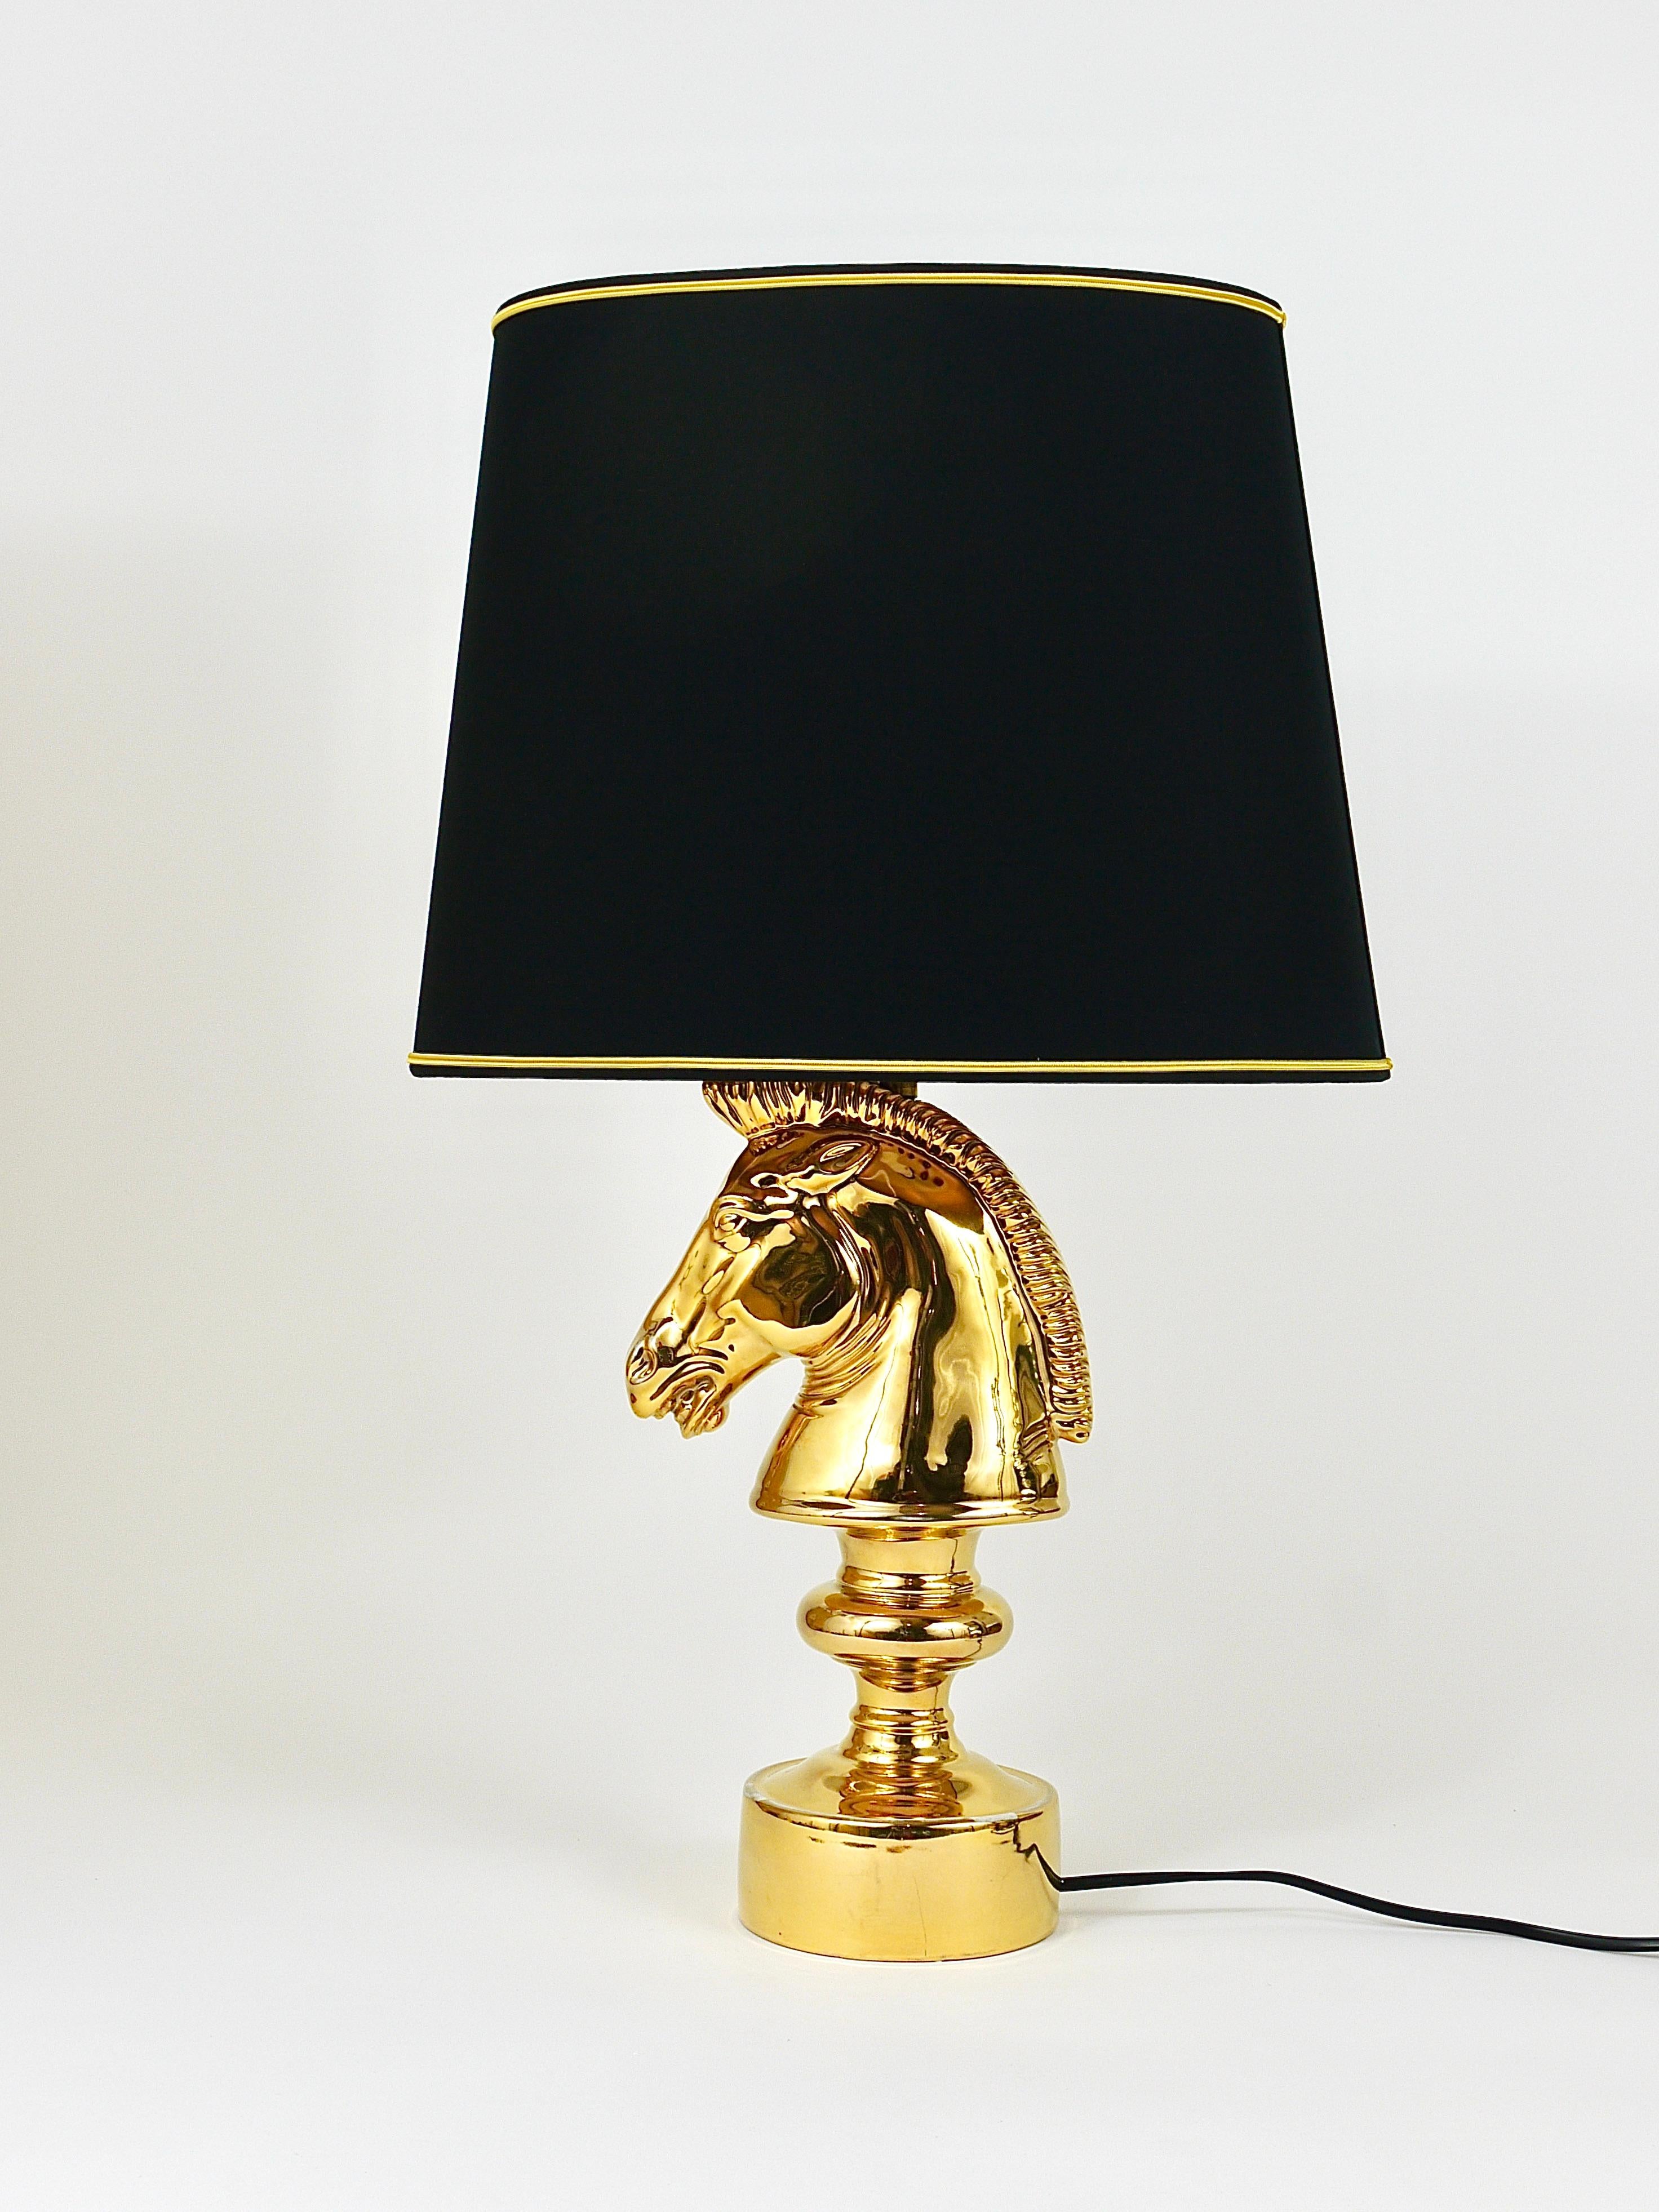 Golden Hollywood Regency Horse Sculpture Table or Side Lamp, Italy, 1970s For Sale 2